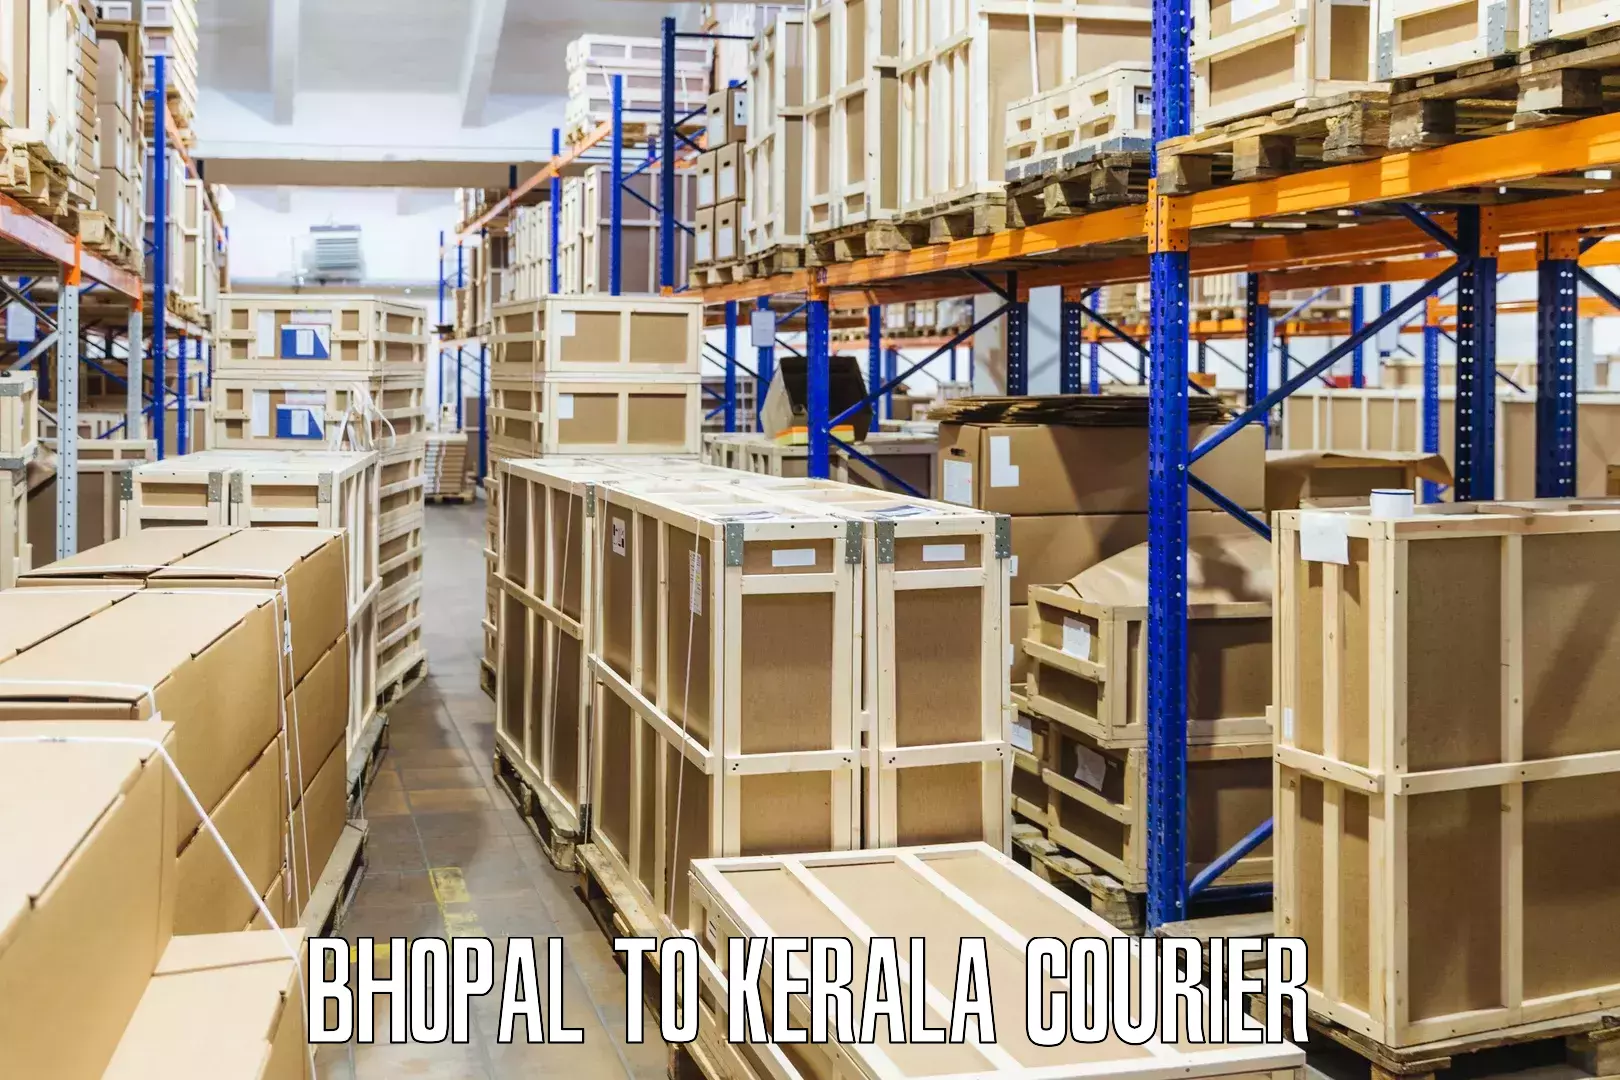 State-of-the-art courier technology Bhopal to Ernakulam